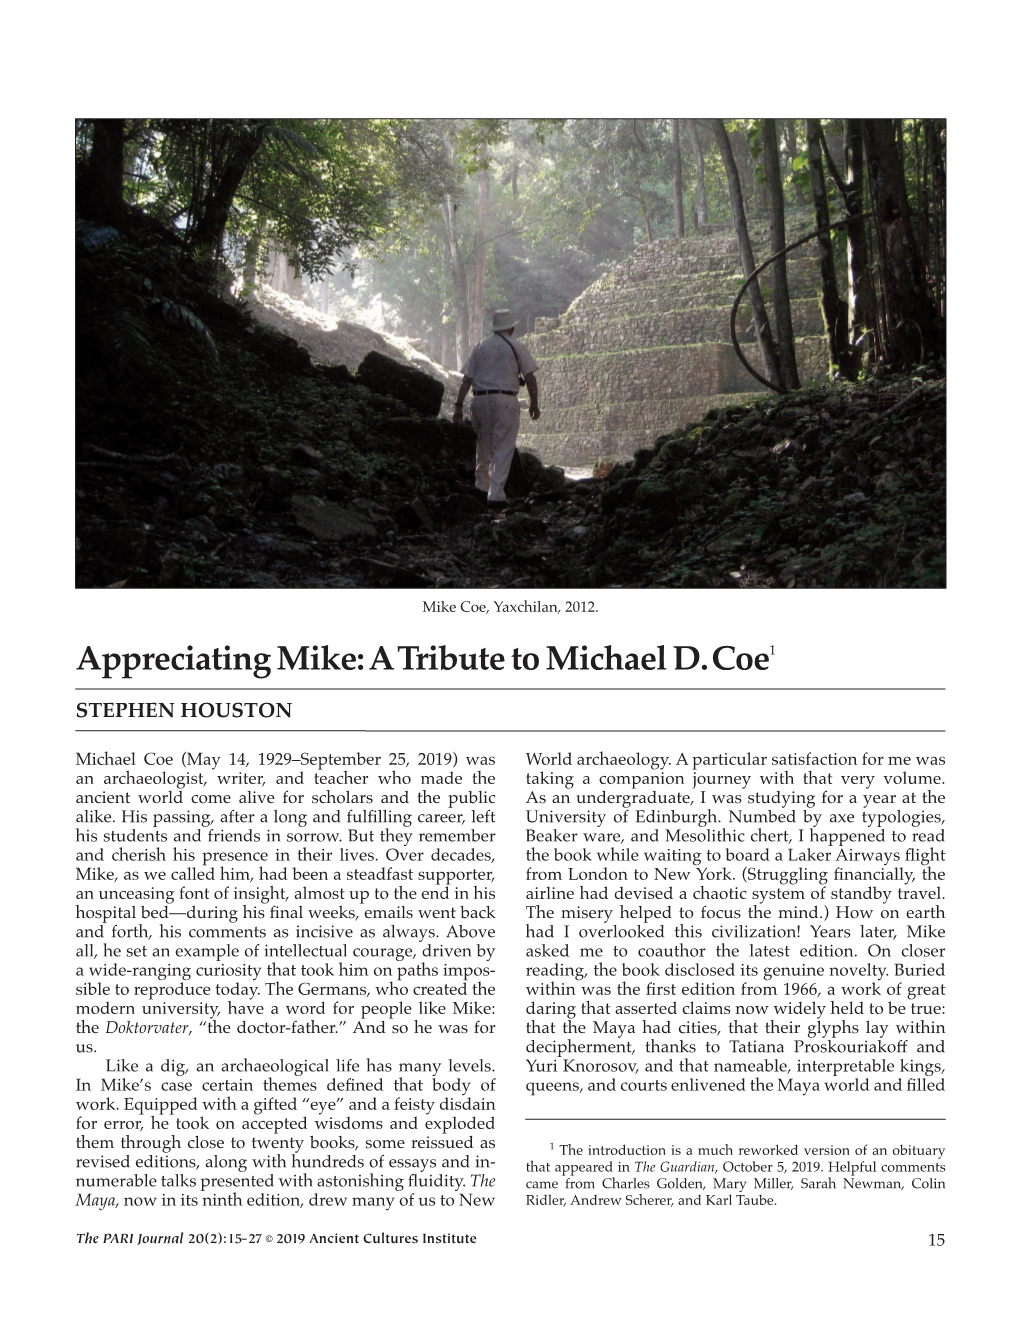 Appreciating Mike: a Tribute to Michael D